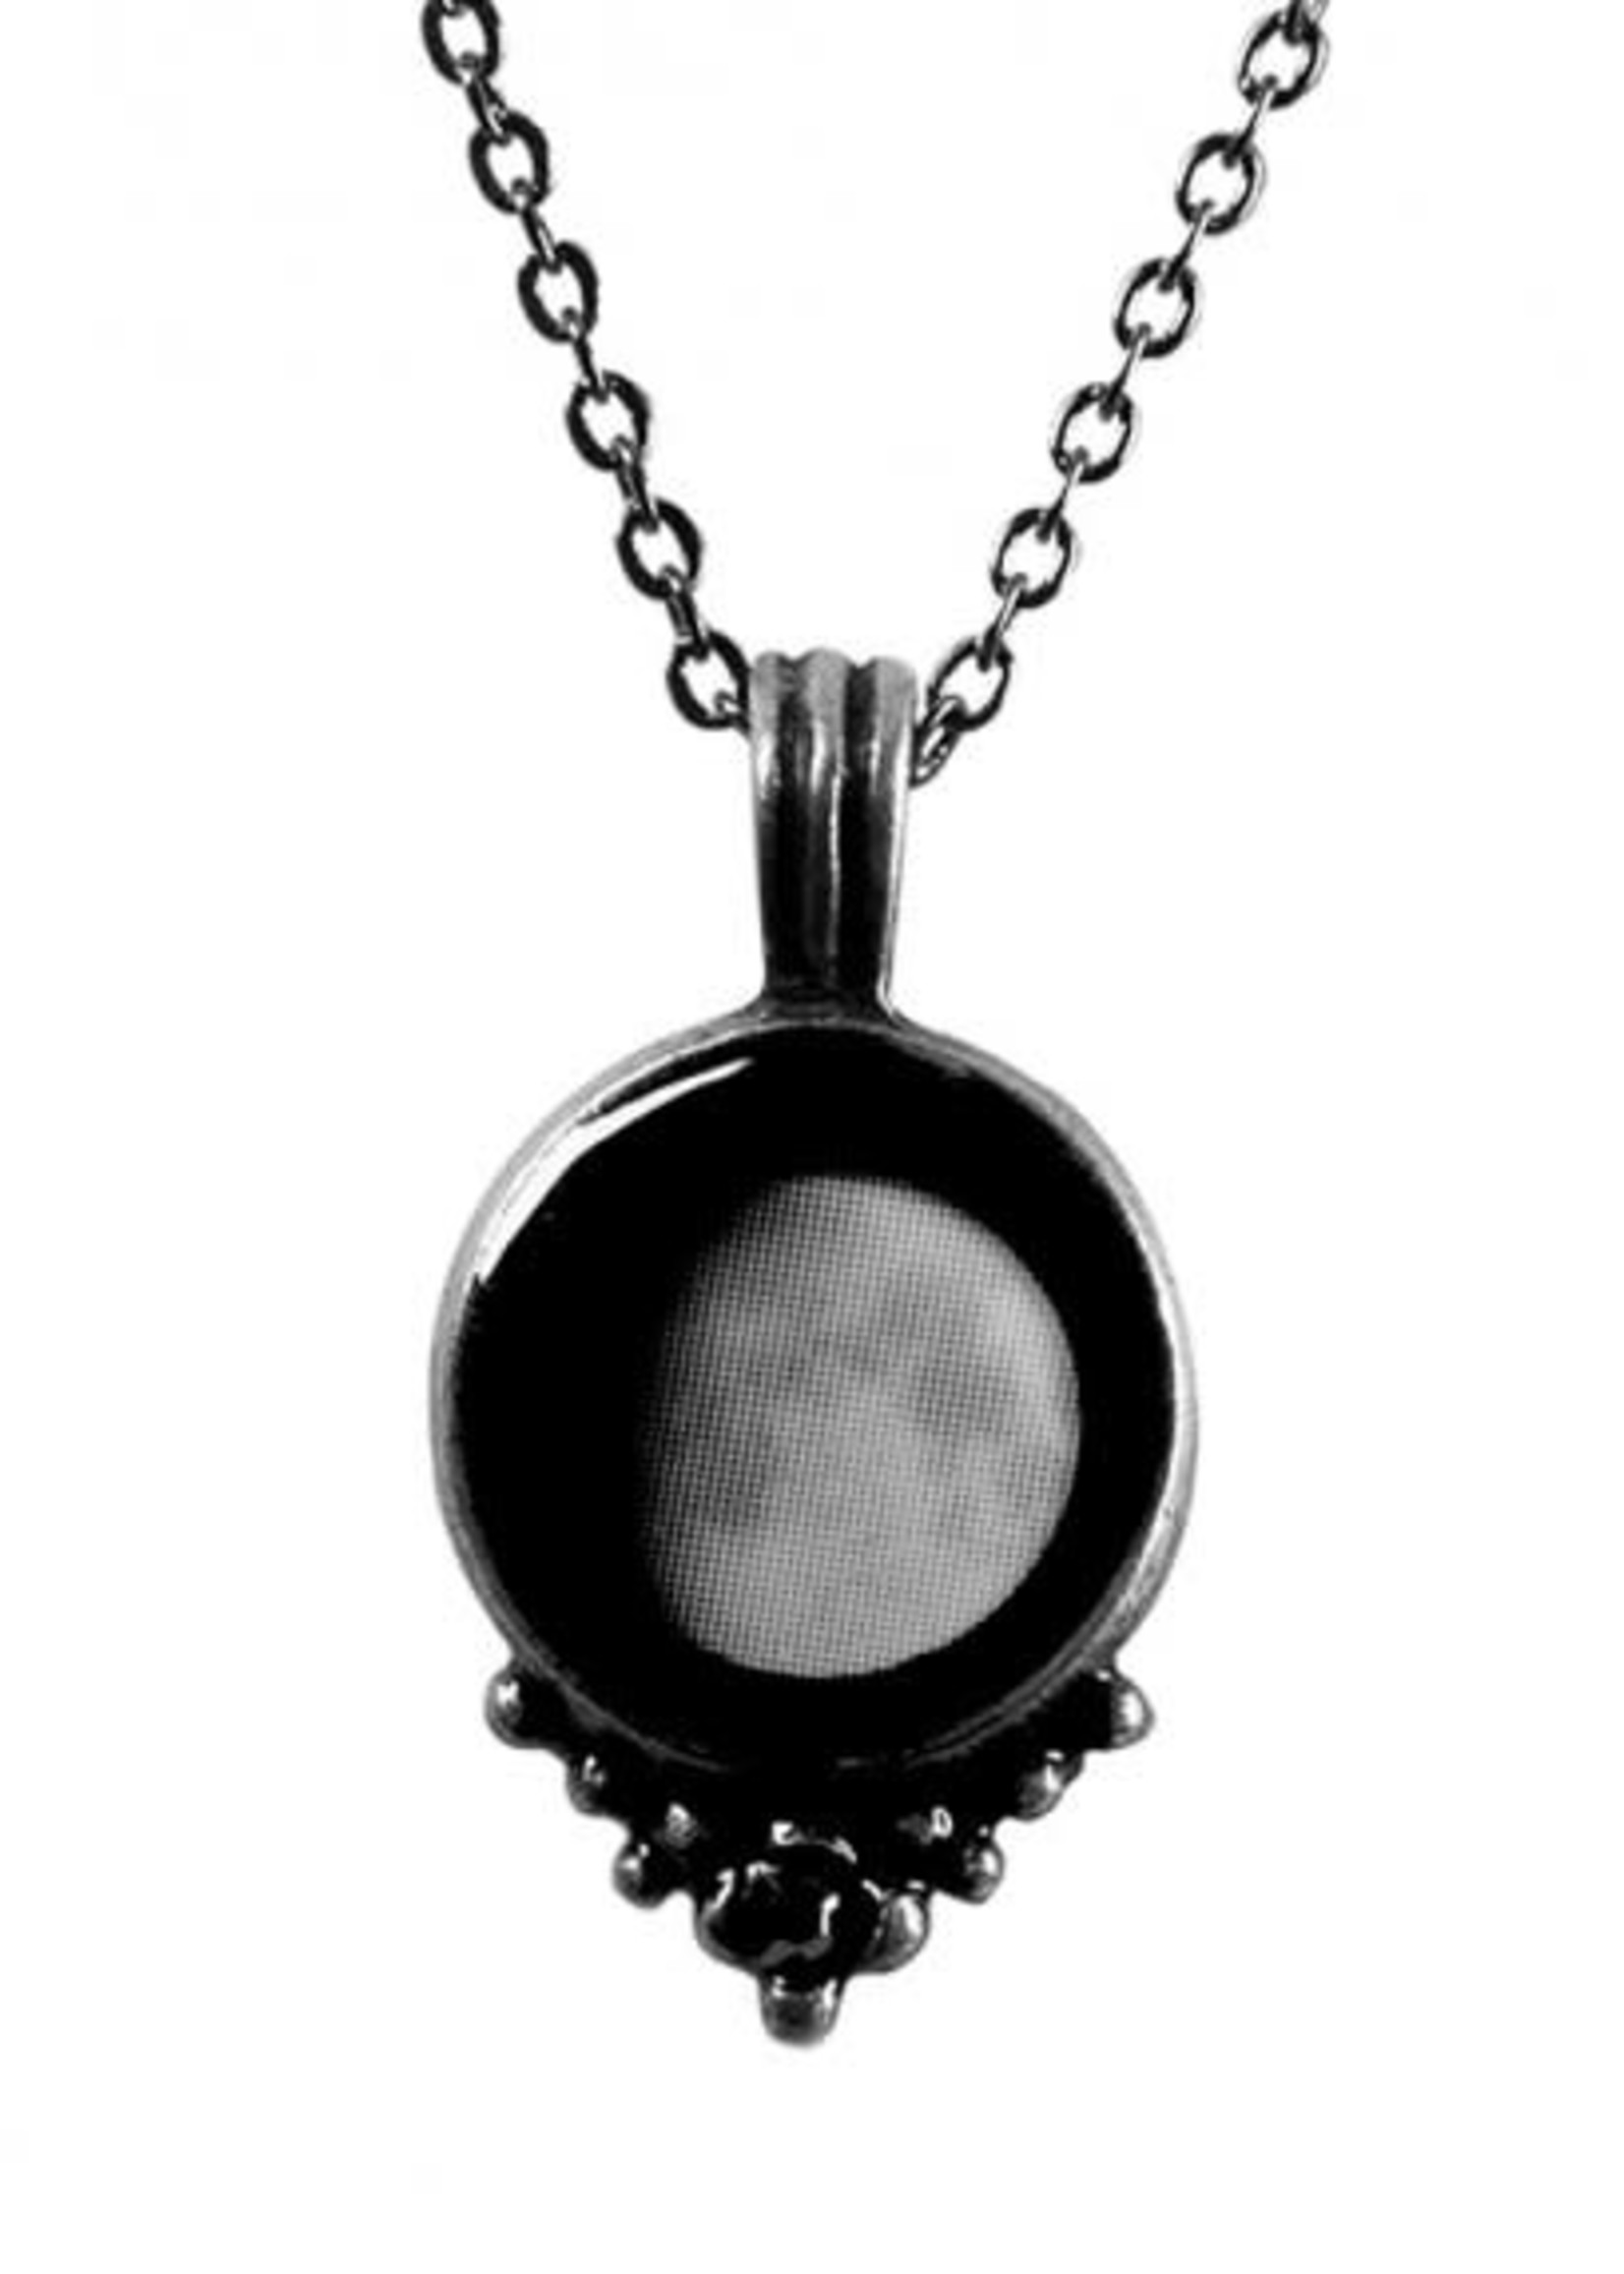 Moonglow Pewter Necklaces 1